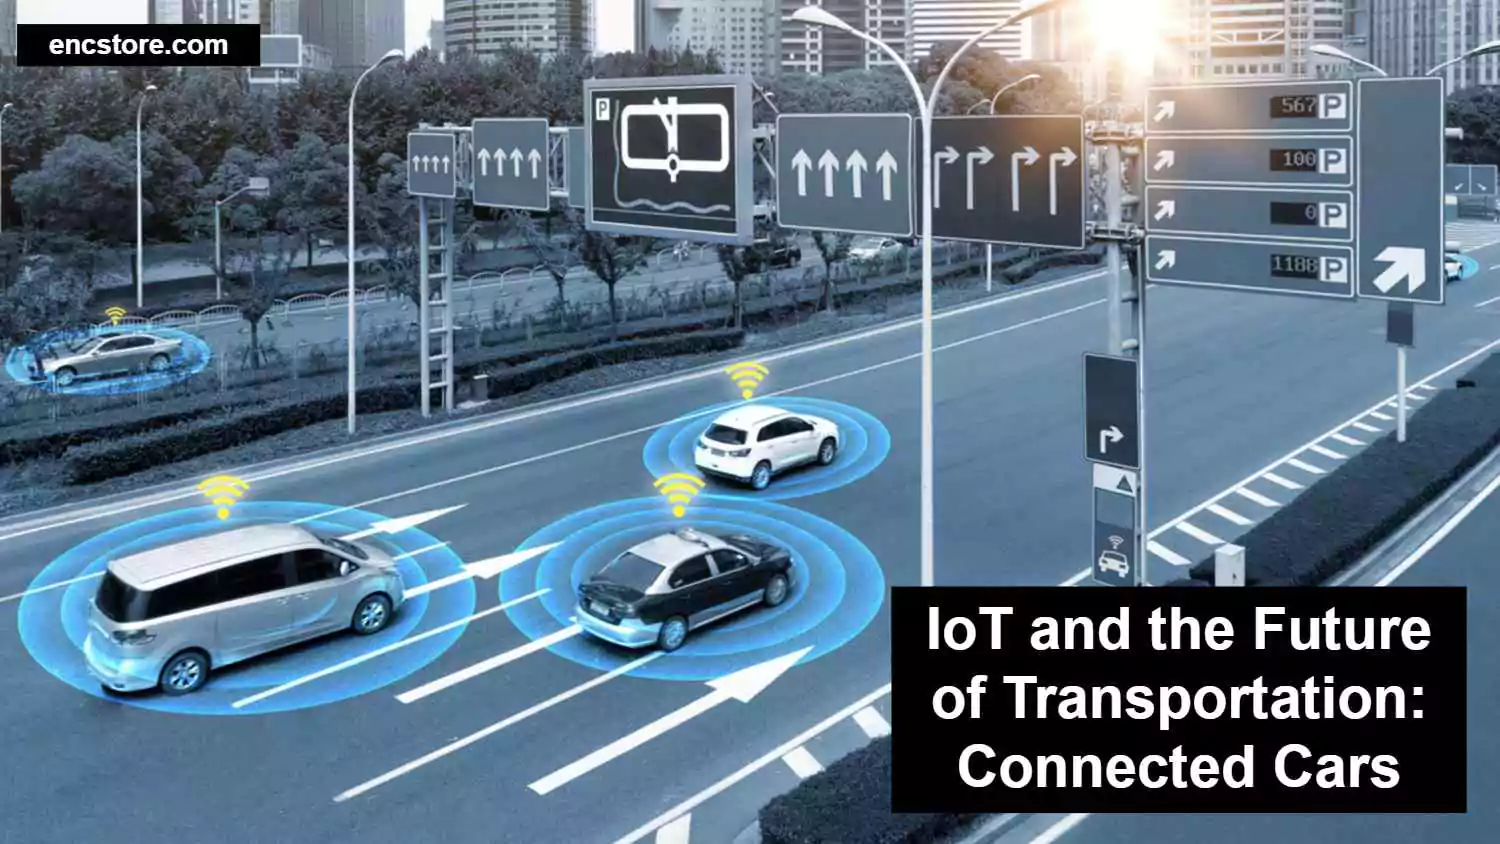 Connected Cars with IoT